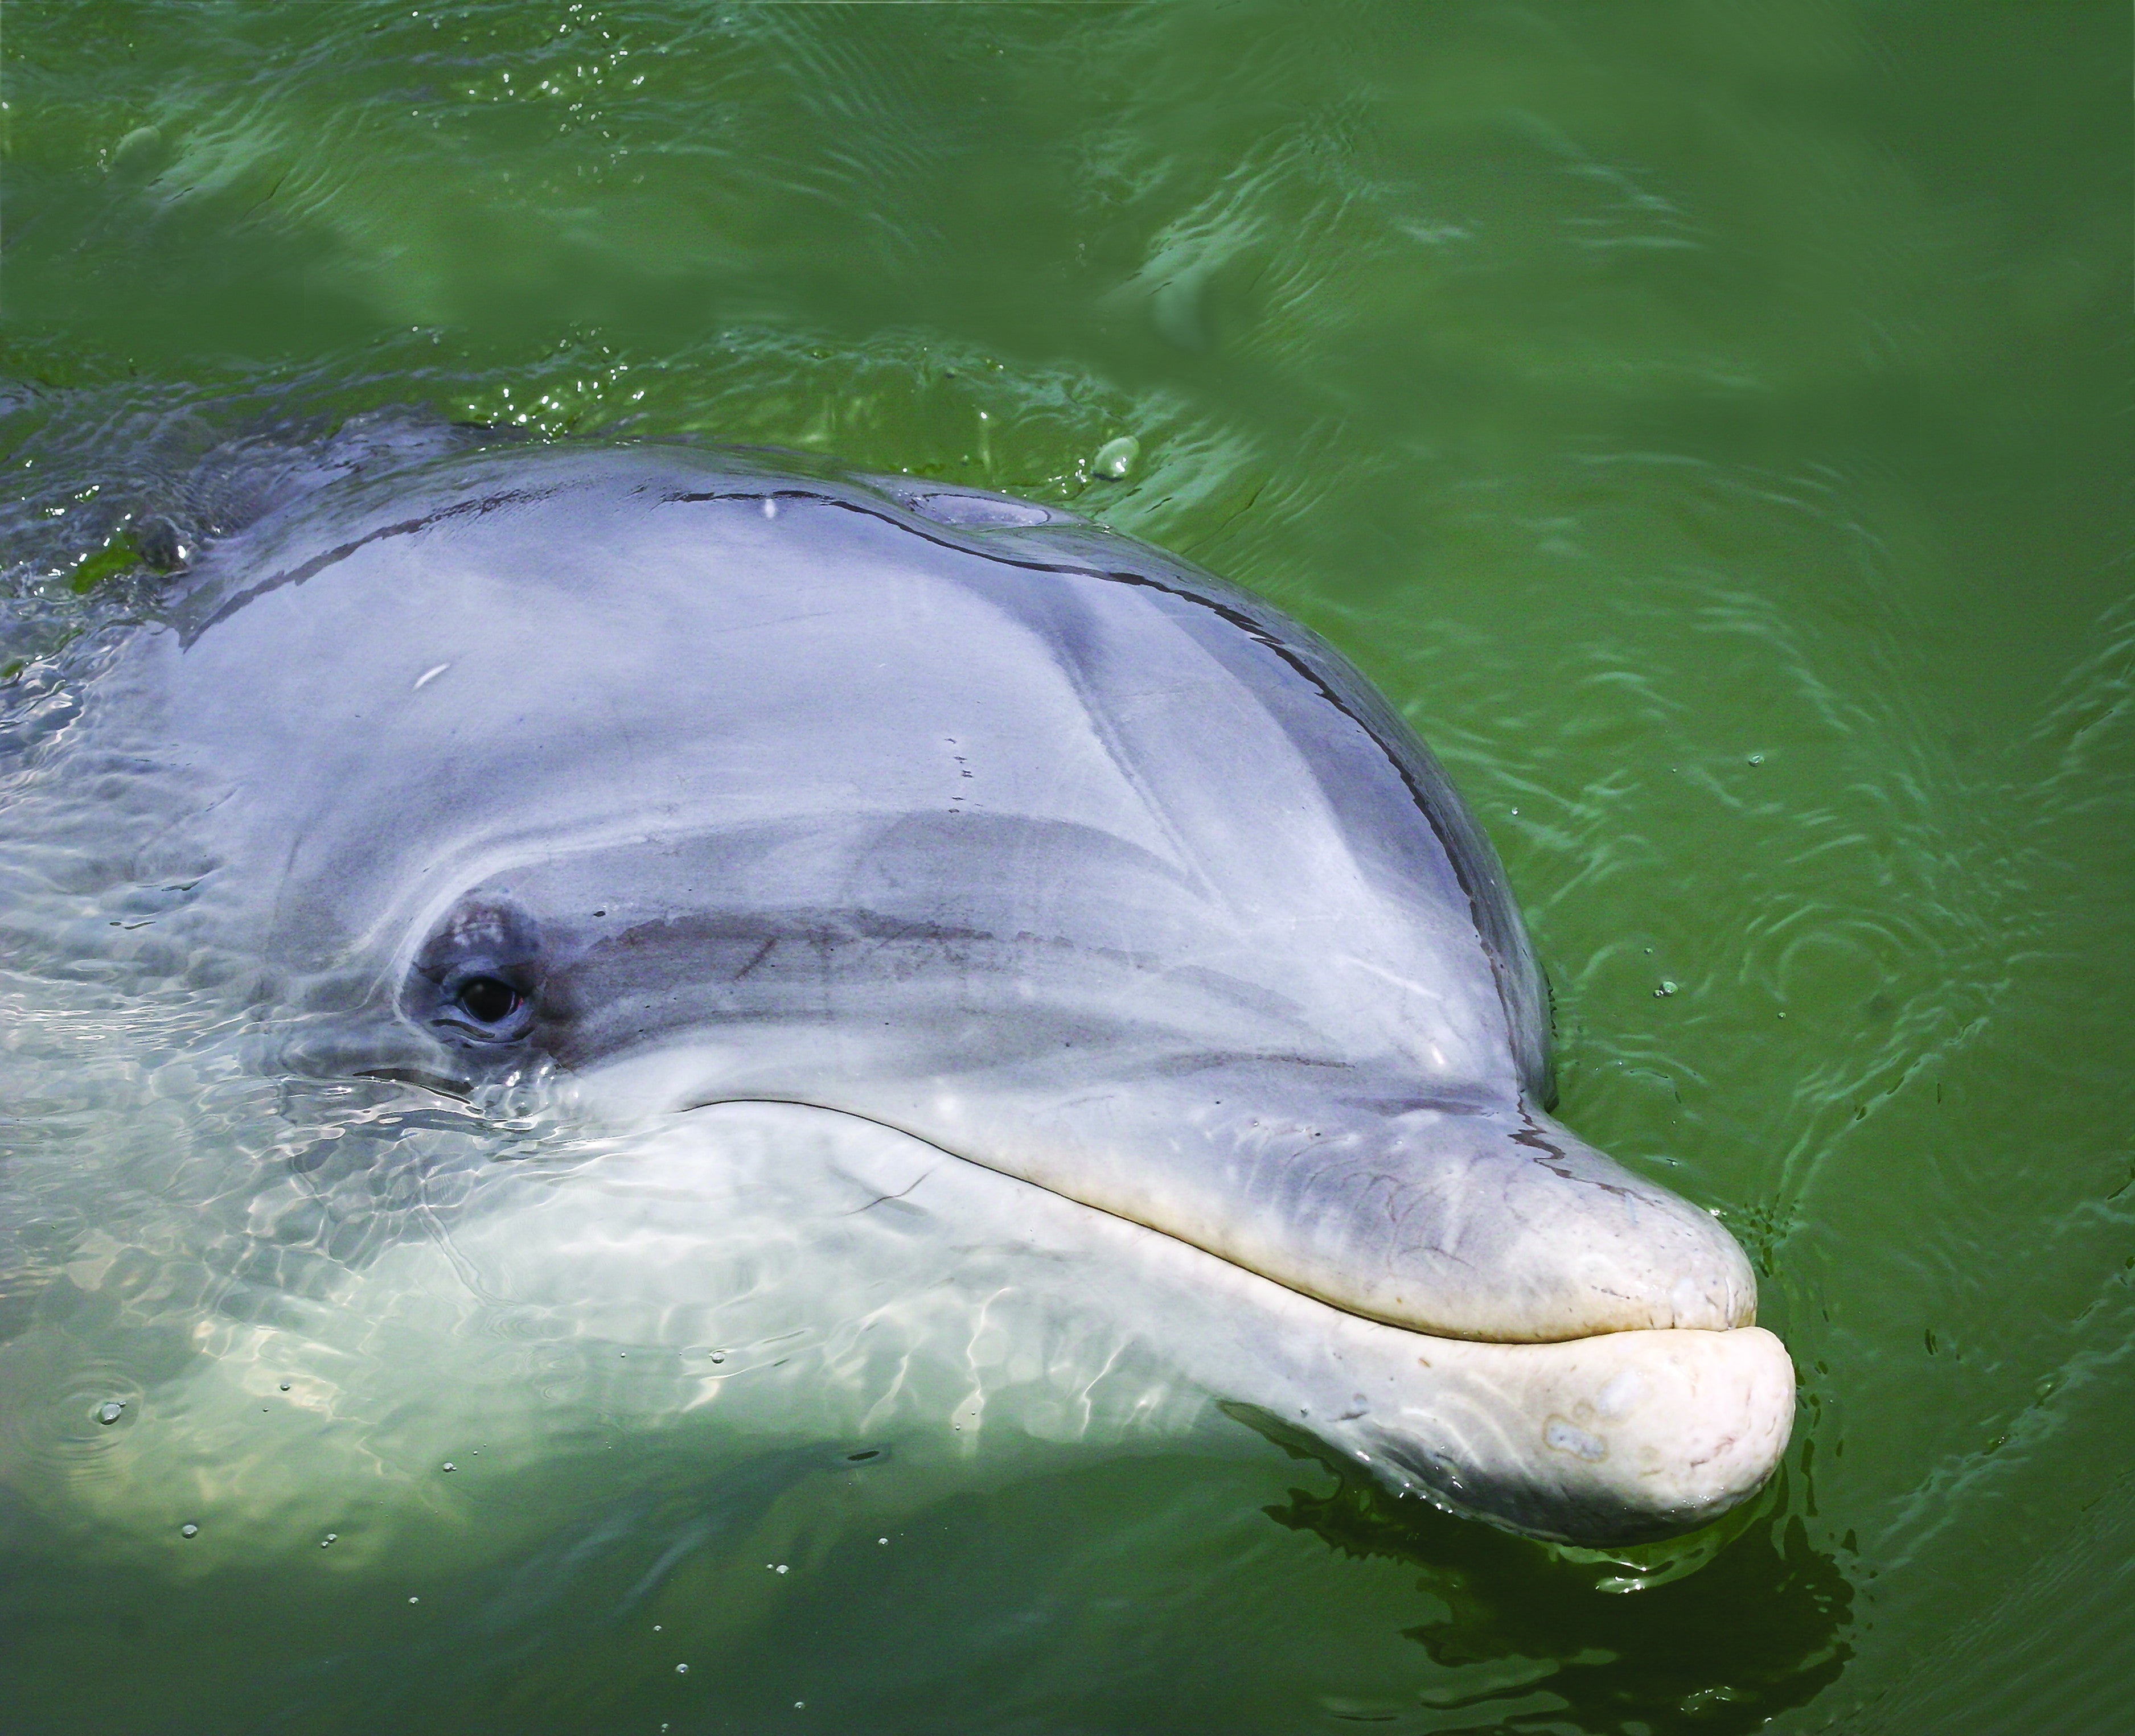 Dolphin photograph: Hilton Head Island - Interactive Coffee table book. Videos from around the island. Starbooks